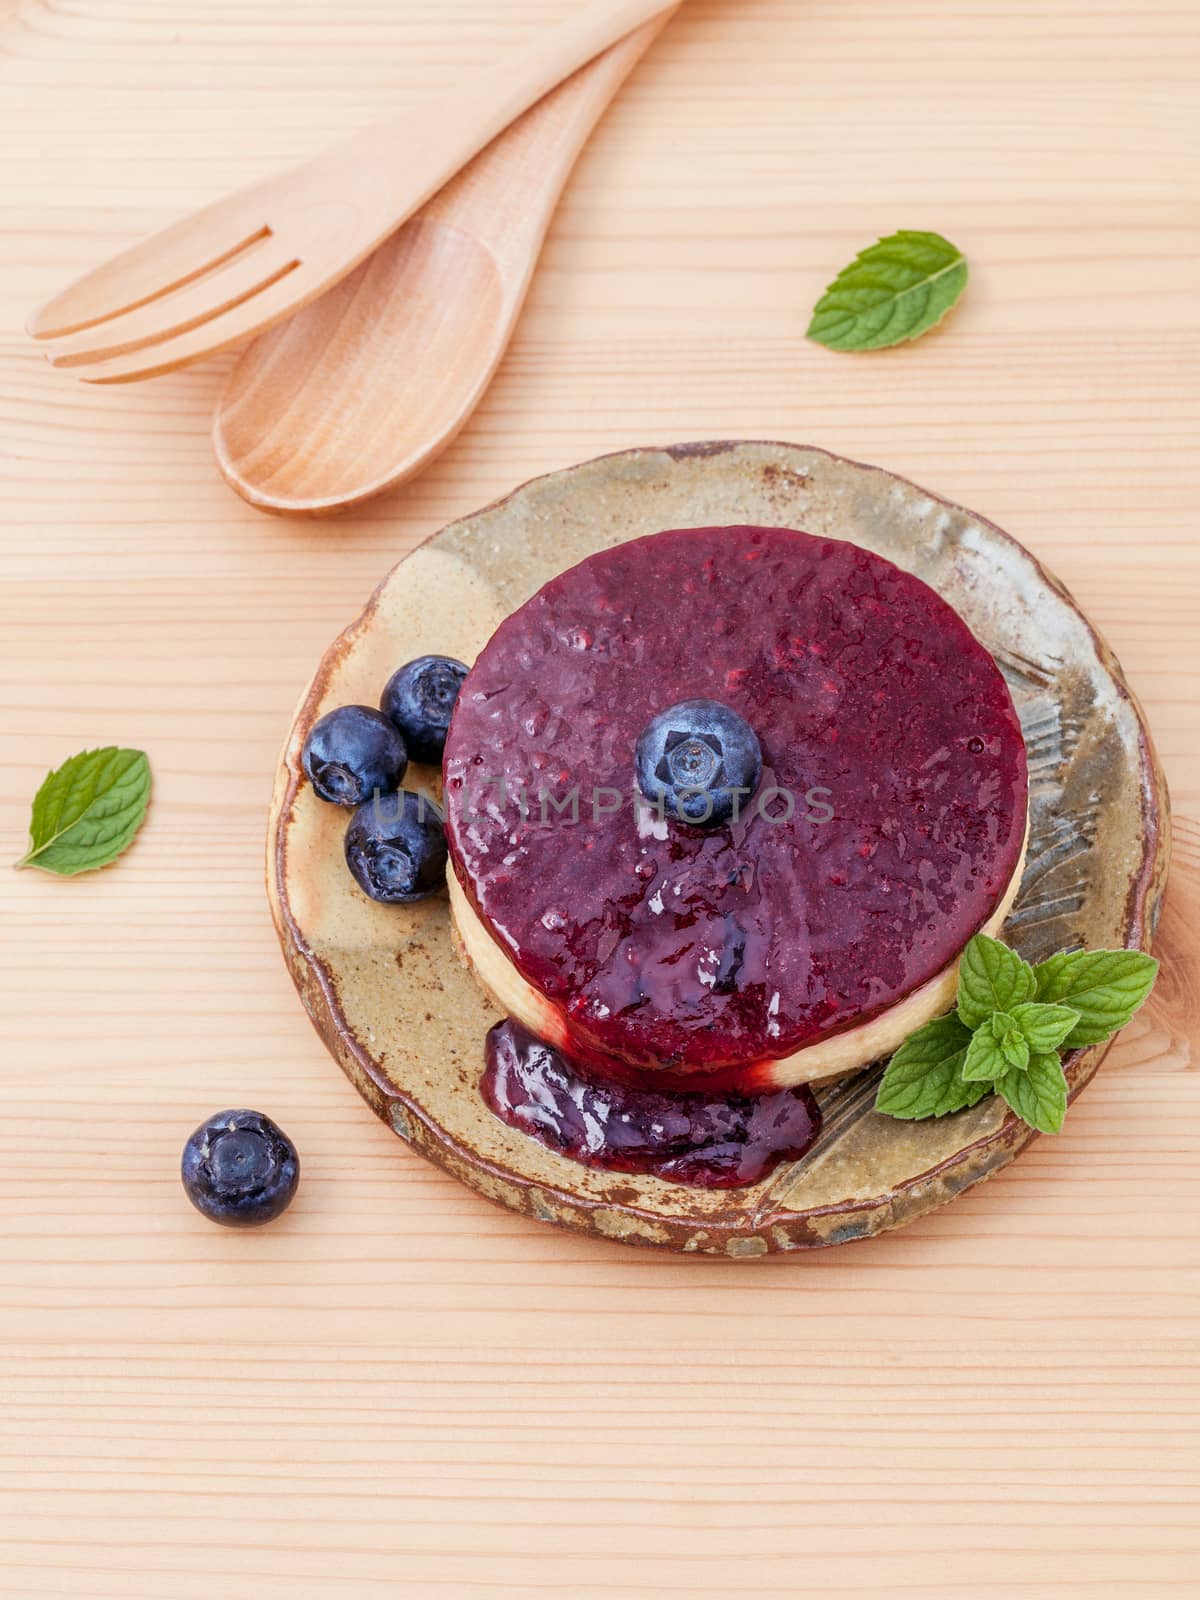 Blueberry cheesecake with fresh mint leaves on wooden background. Selective focus depth of field.